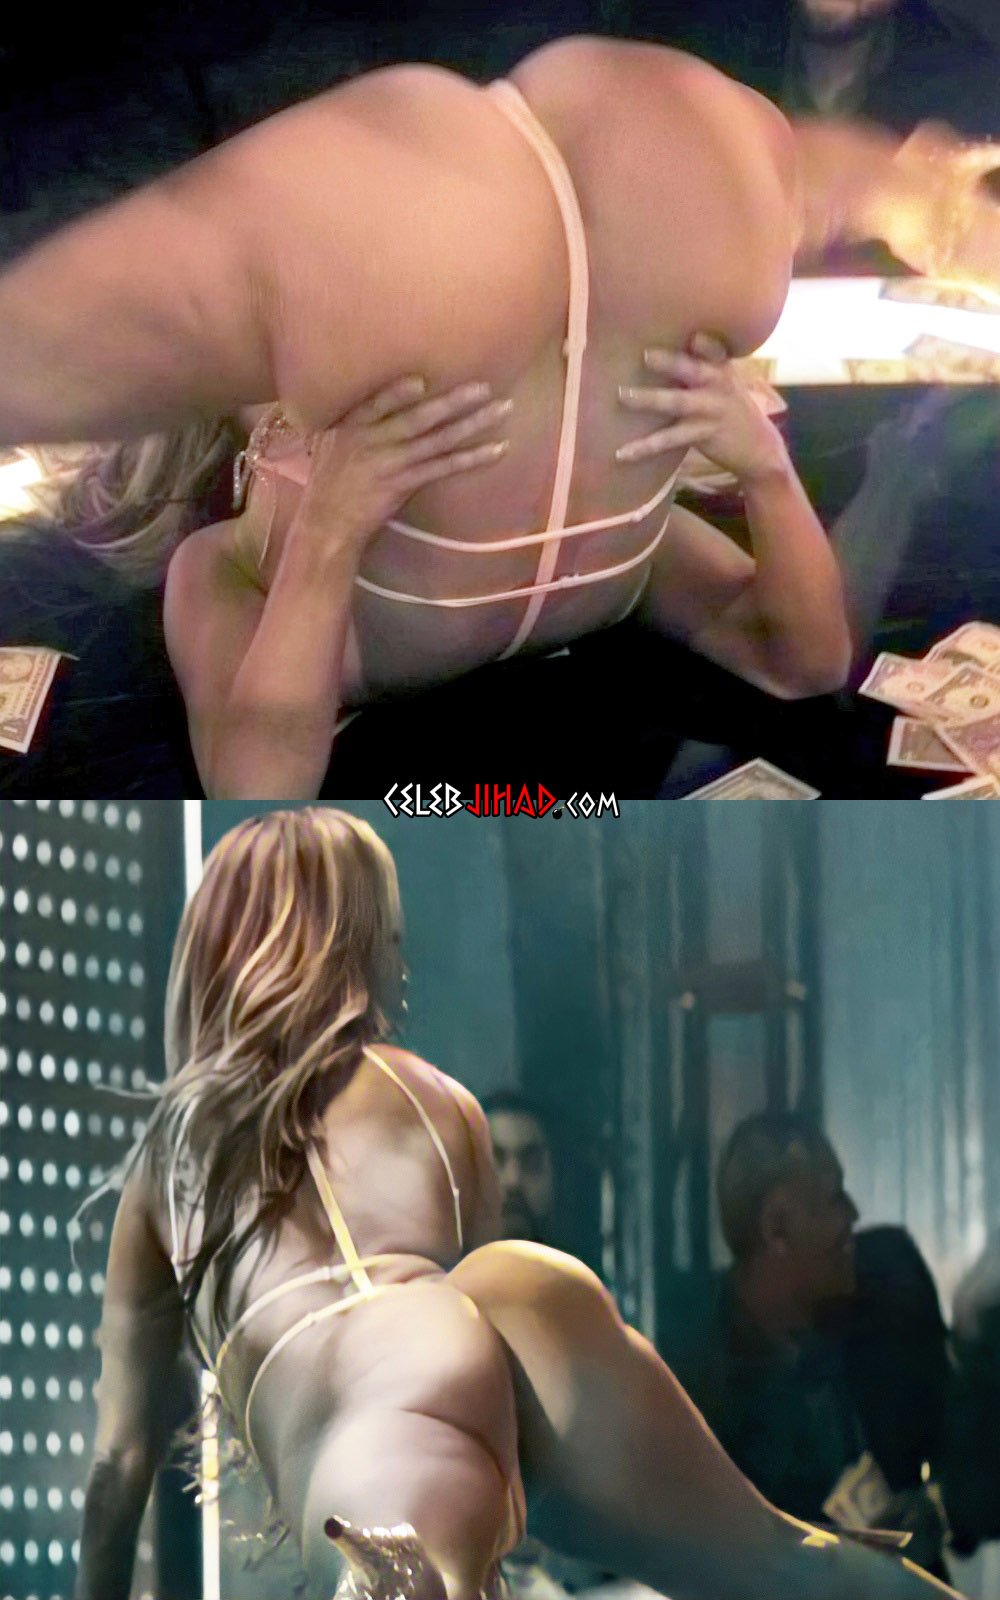 J lo ass pictures - Naked photo